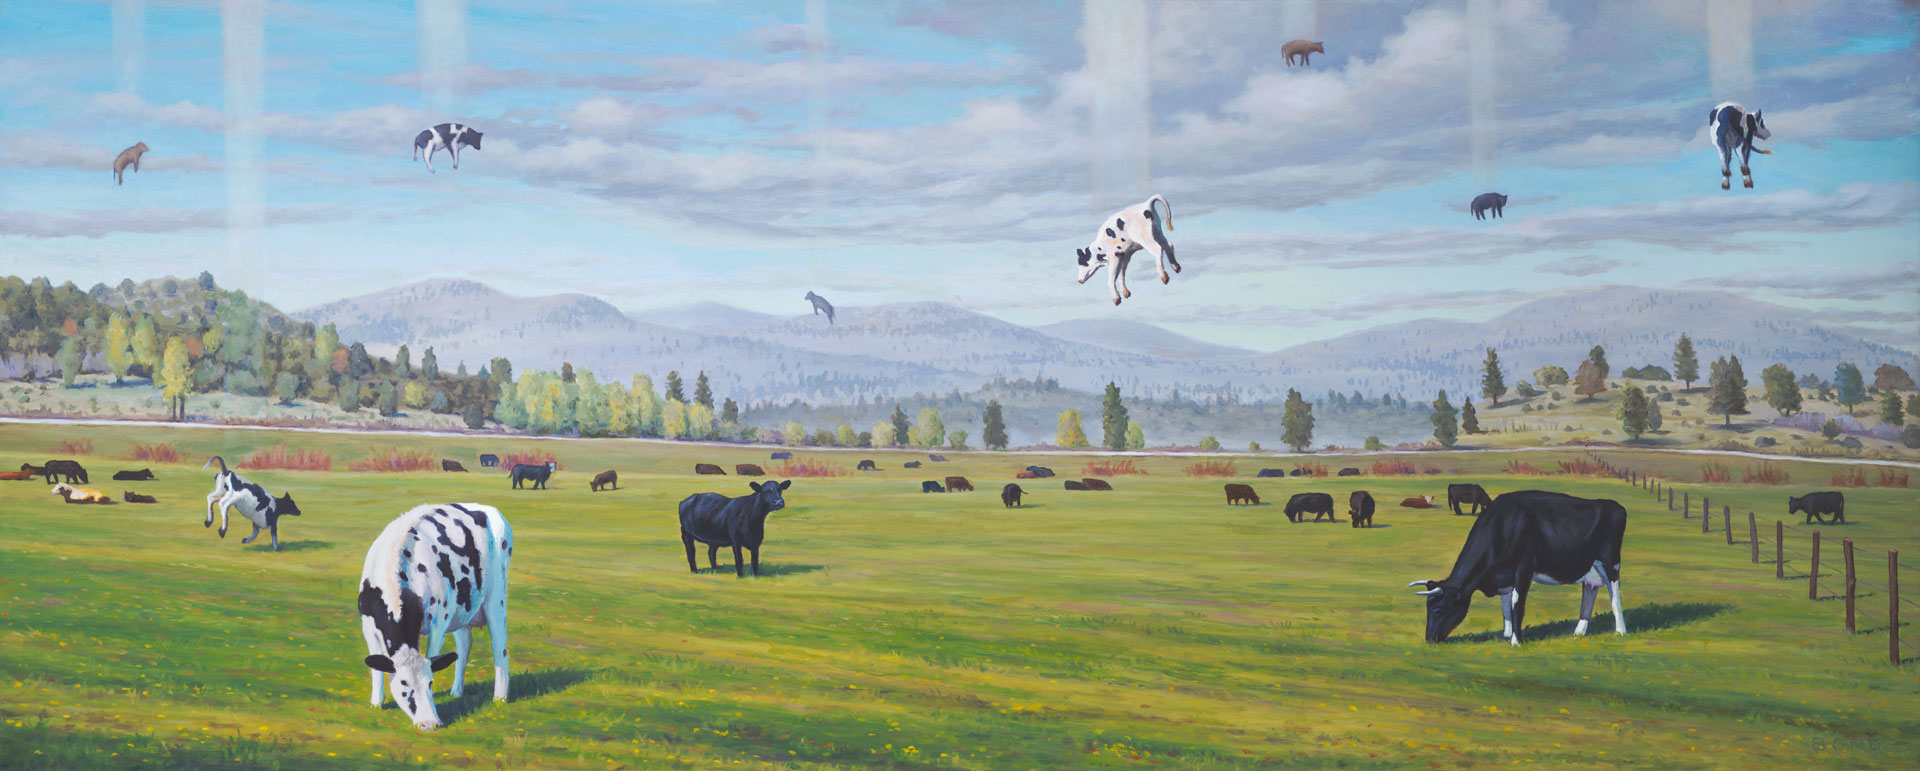 Ascending Cows aka the Great Bovine Rapture, painting of cows ascending to the sky,  art meaning is happiness, art about adapting,art conveying positive joy, art with cattle, art with cows, art with a ranch in a field with a pasture, art about fate chance hope, art wtih floating cows, art meaning enlightened enlightenment, soulful uplifting inspirational art, soul stirring illusion art, romantic art,  surrealism, surreal art, dreamlike imagery, fanciful art, fantasy art, dreamscape visual, metaphysical art, spiritual painting, metaphysical painting, spiritual art, whimsical art, whimsy art, dream art, fantastic realism art, limited edition giclee, signed art print, fine art reproduction, original magic realism oil painting by Paul Bond